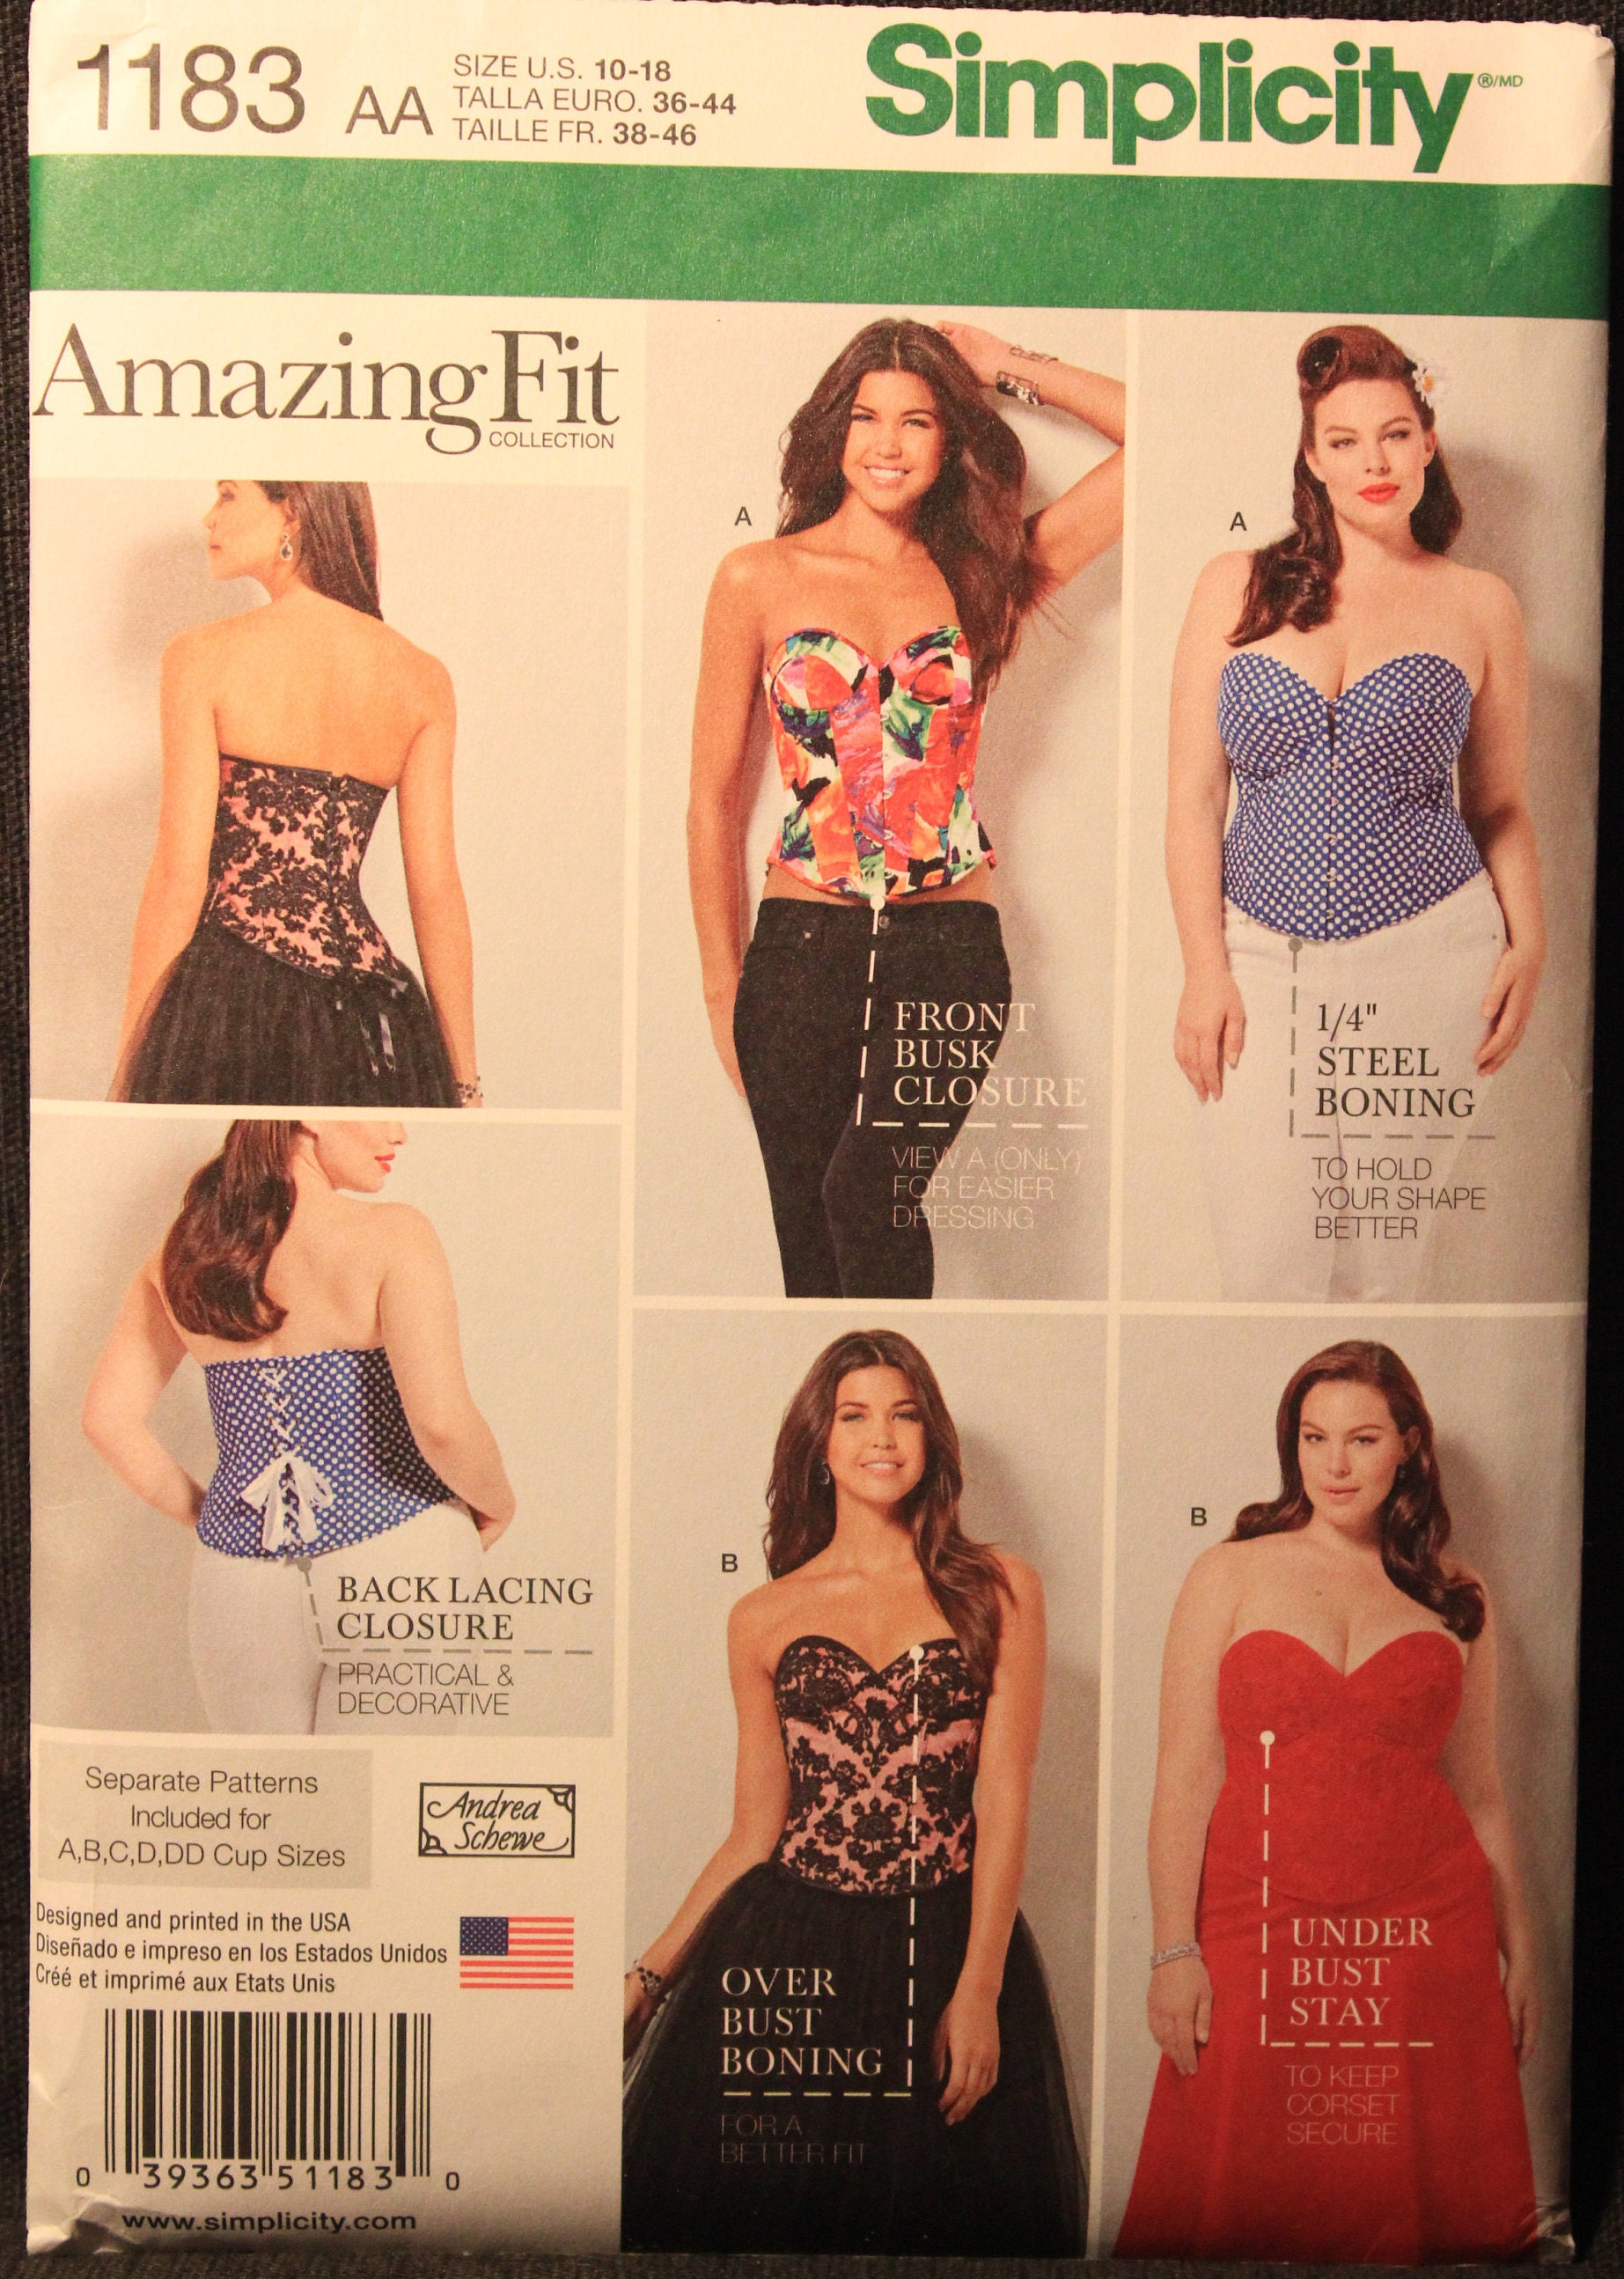 Simplicity Pattern 1183 AA Amazing Fit Collection Andrea Schewe